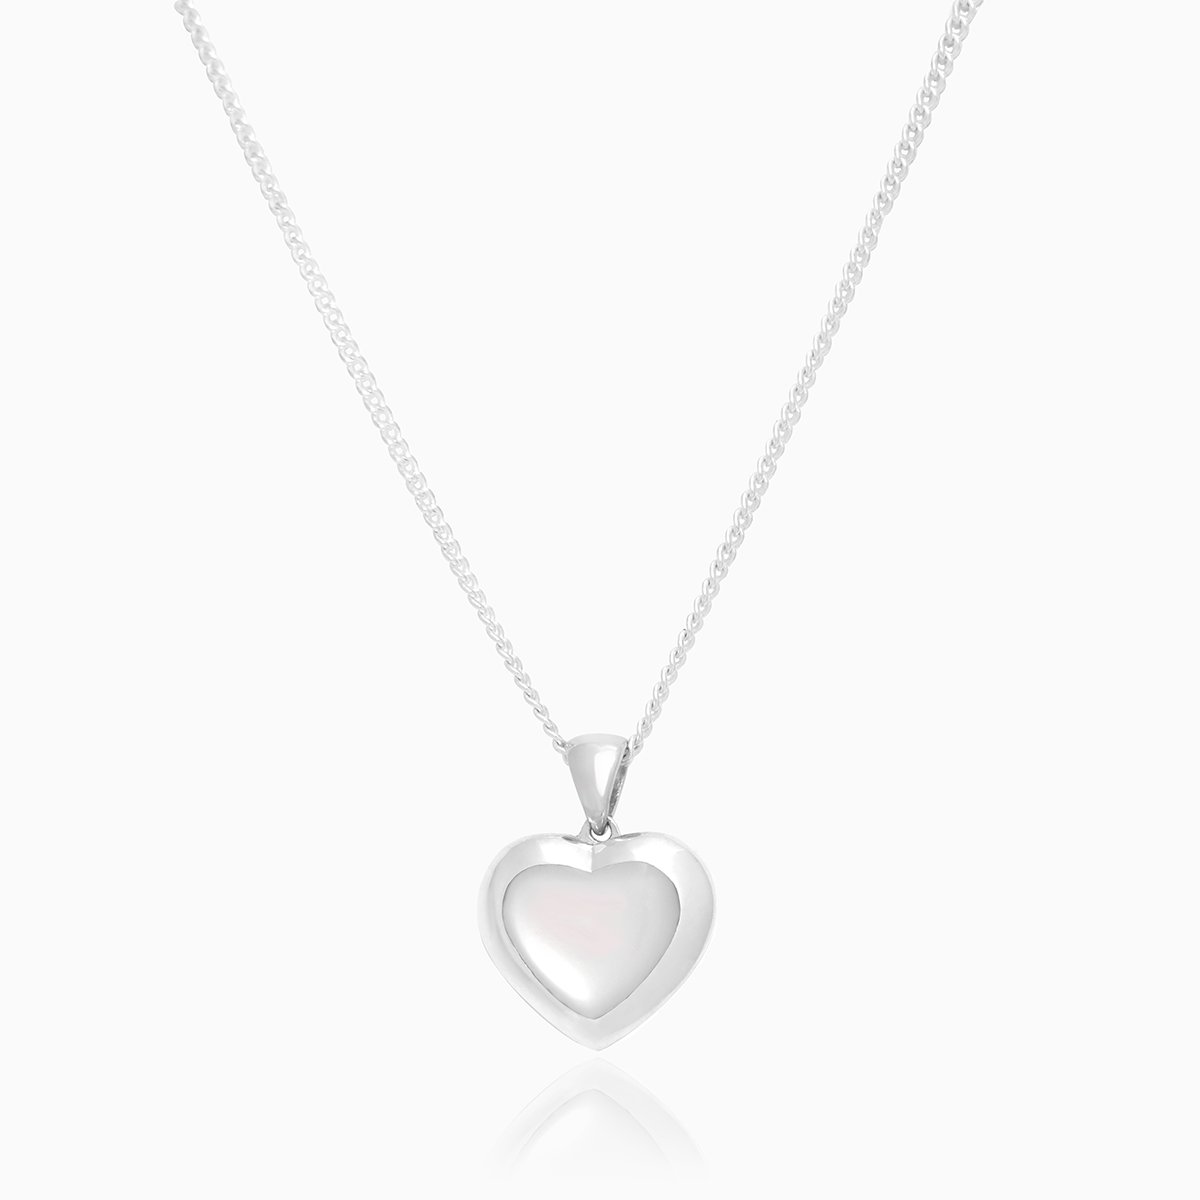  Front shot of a petite heart-shaped sterling silver locket set with white mother of pearl on a sterling silver curb chain.